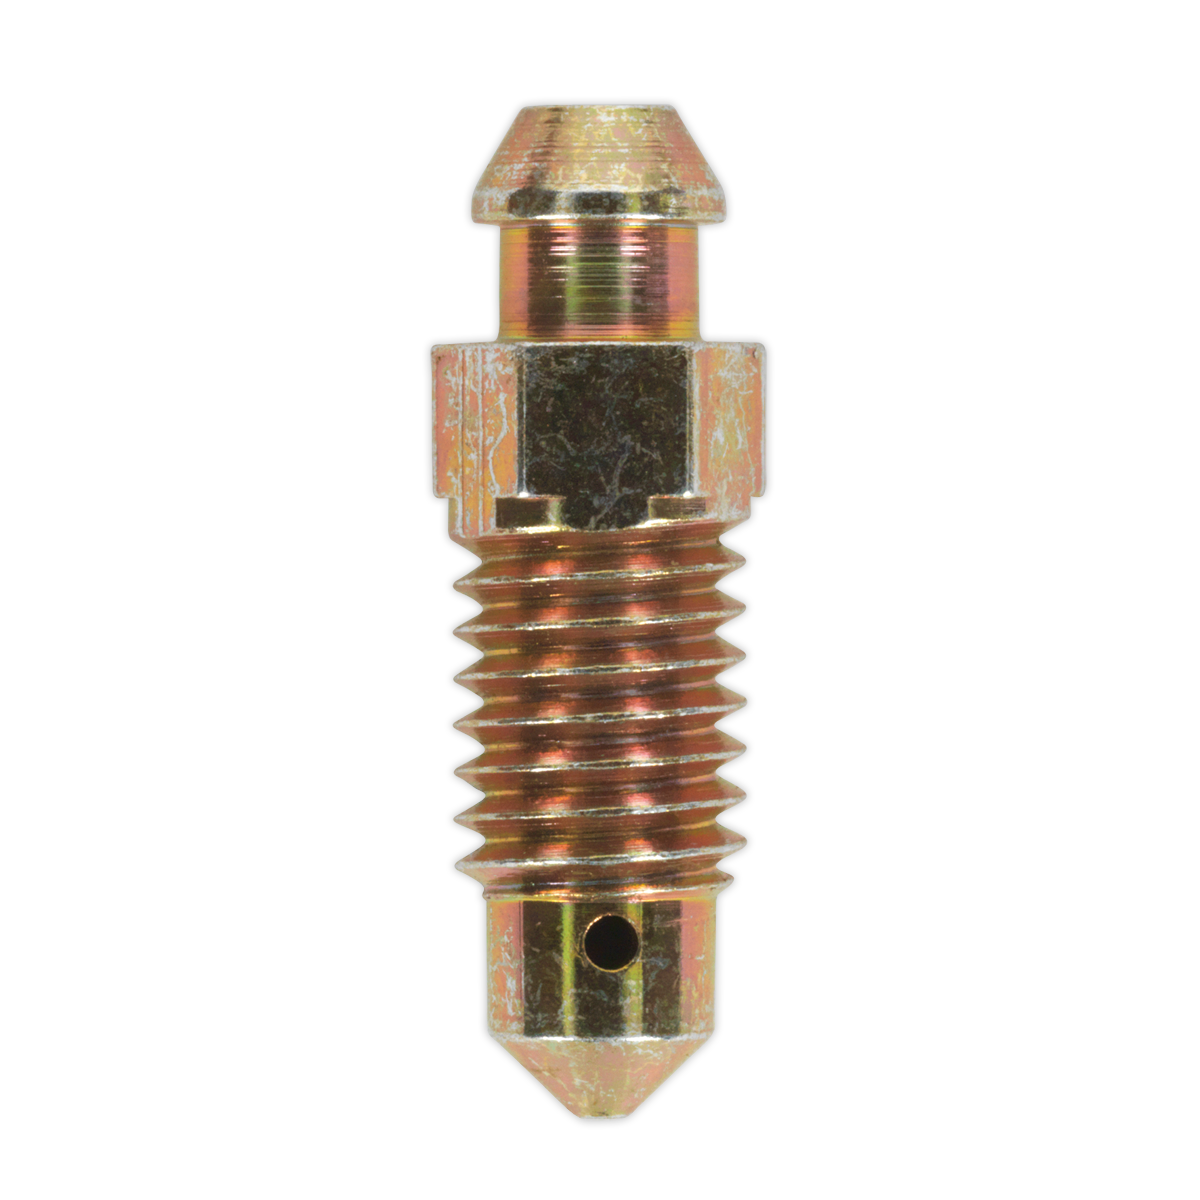 Brake Bleed Screw M8 x 24mm 1.25mm Pitch Pack of 10 - BS8125 - Farming Parts